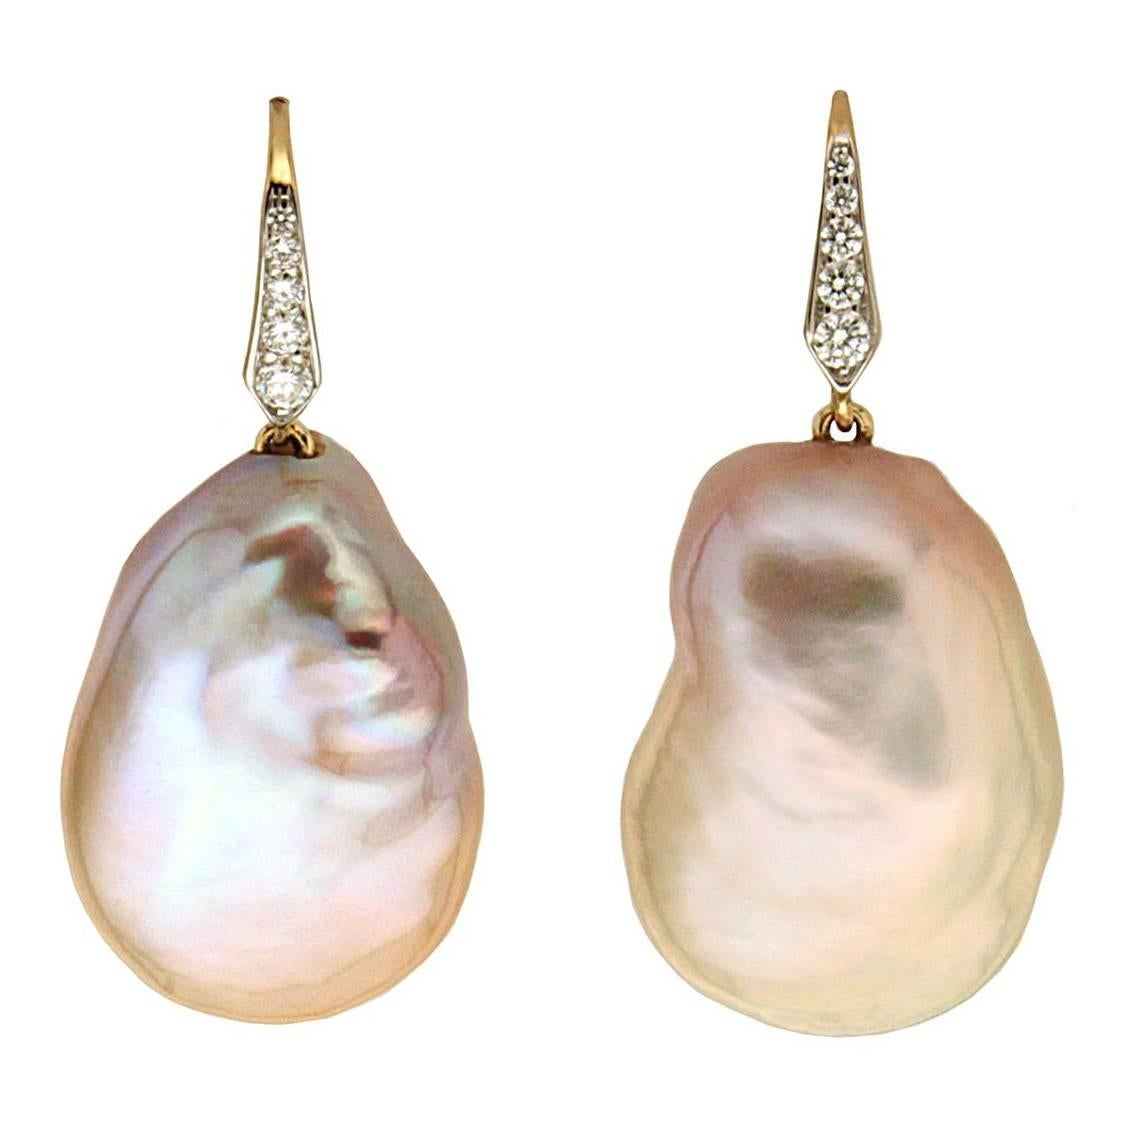 Baroque Toast Fresh Water Pearl Drops Earrings with Diamond Lever Backs